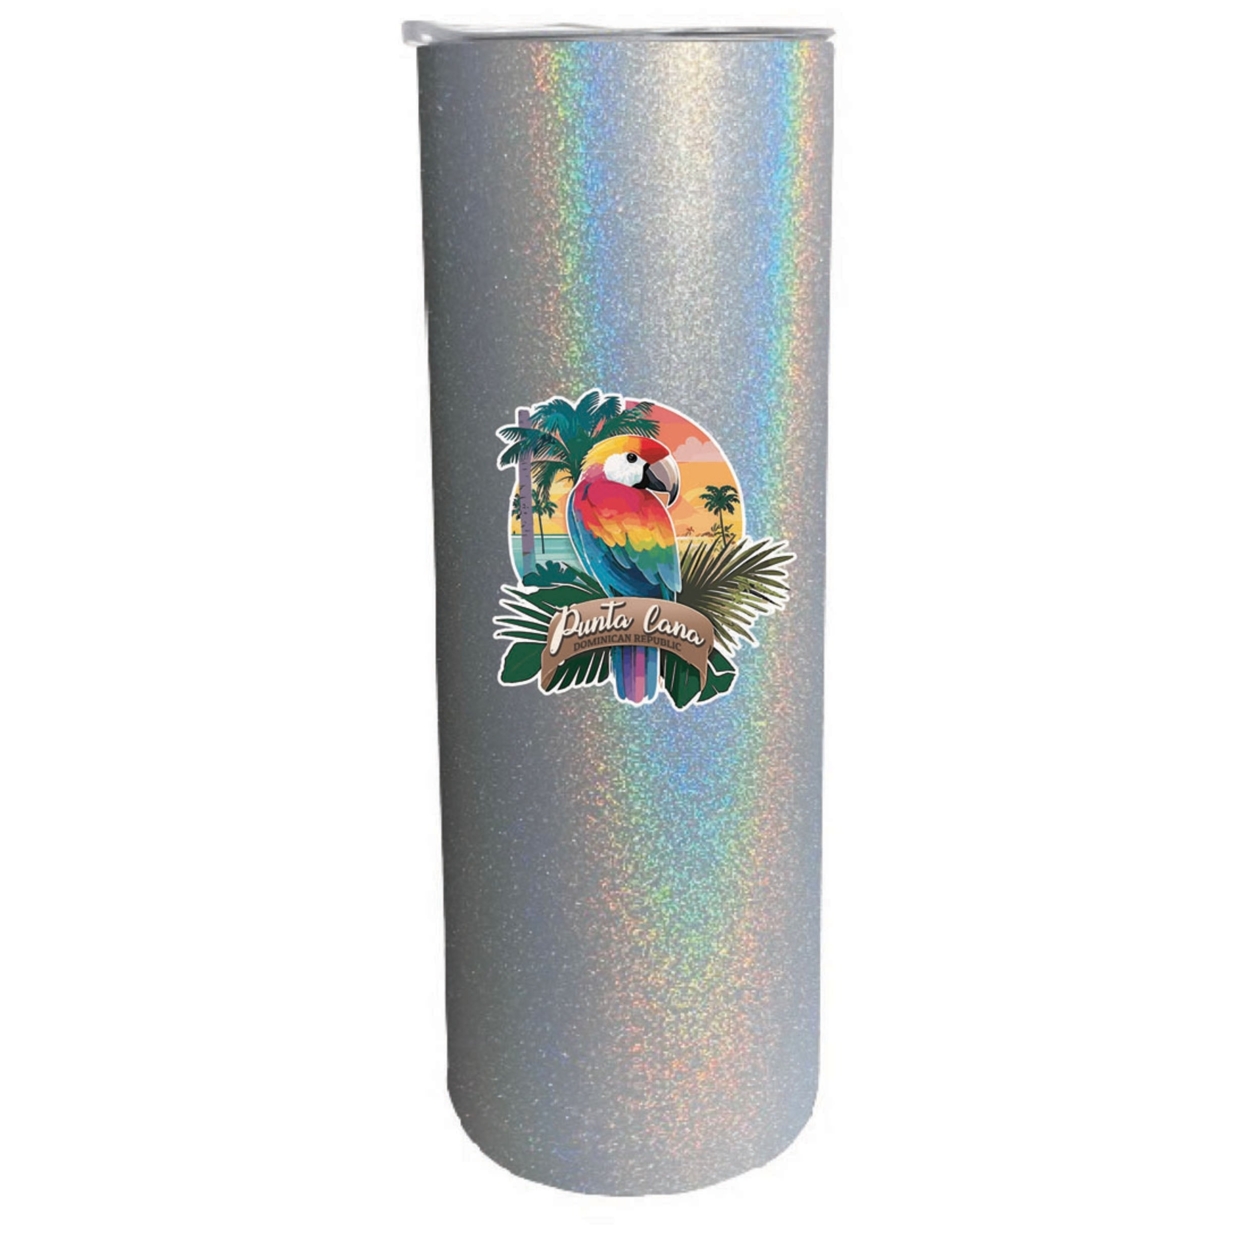 Punta Cana Dominican Republic Souvenir 20 Oz Insulated Stainless Steel Skinny Tumbler - Black, PALM